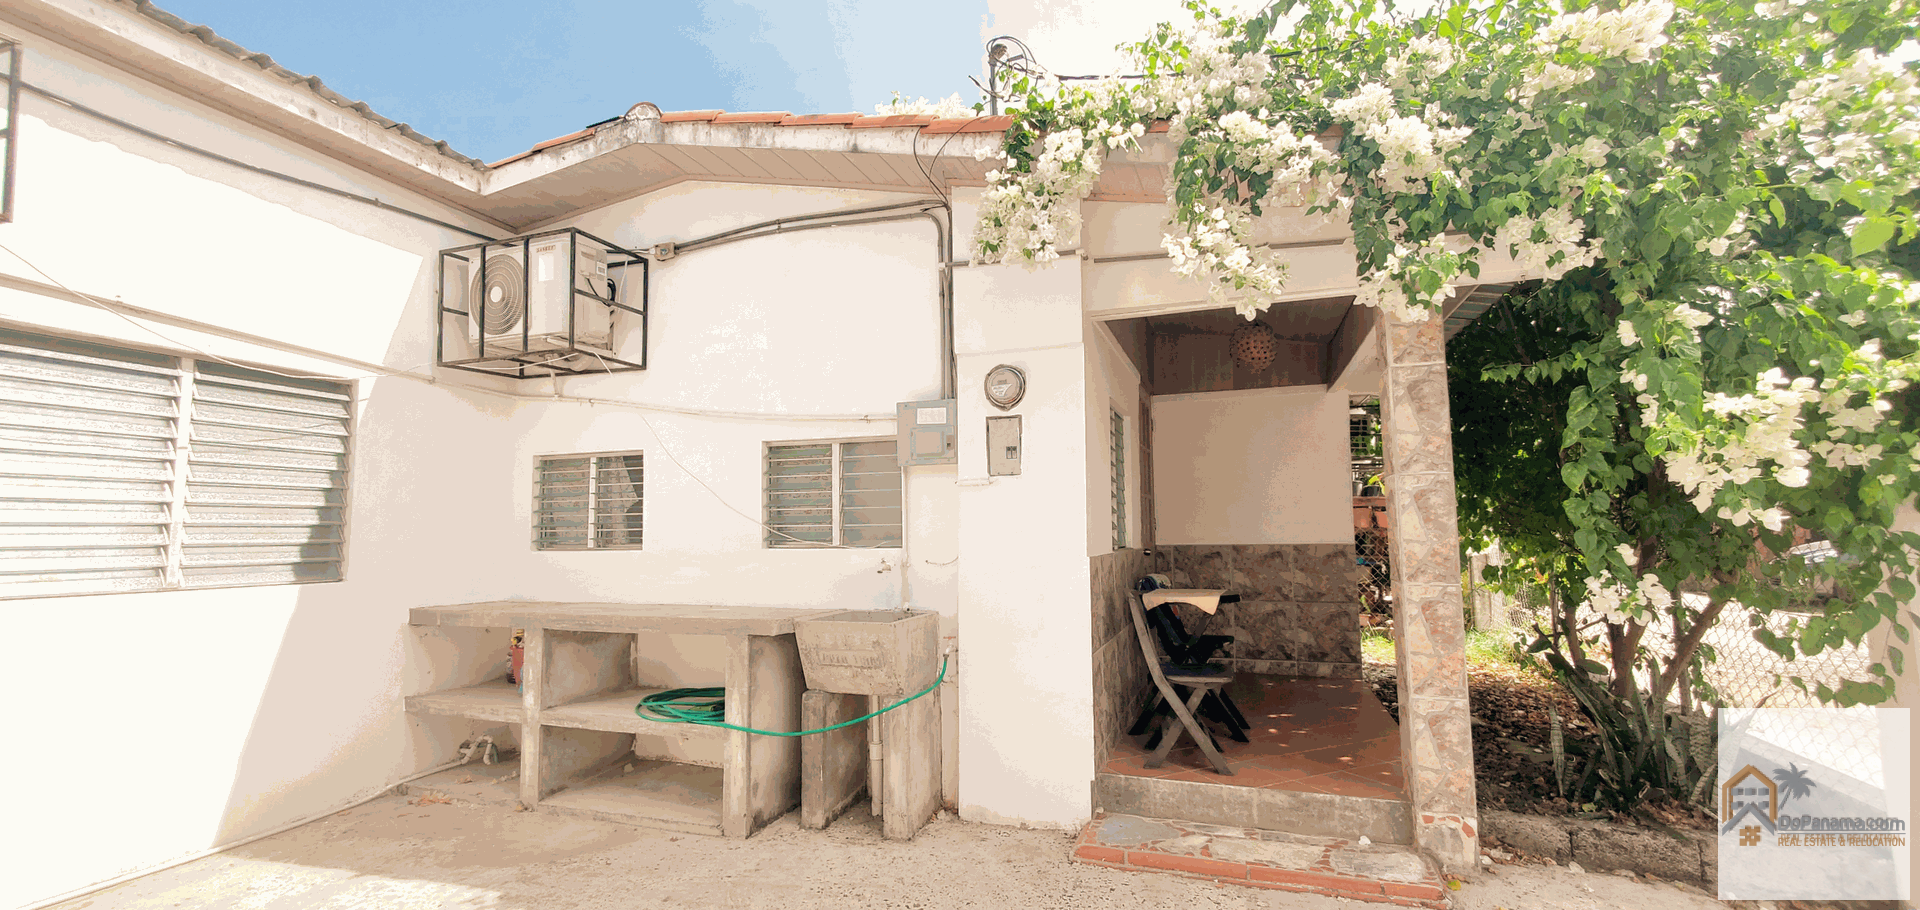 3-Bedroom House in Pedasi, Panama - Income Property with Owner Financing - Property ID PLS-18562